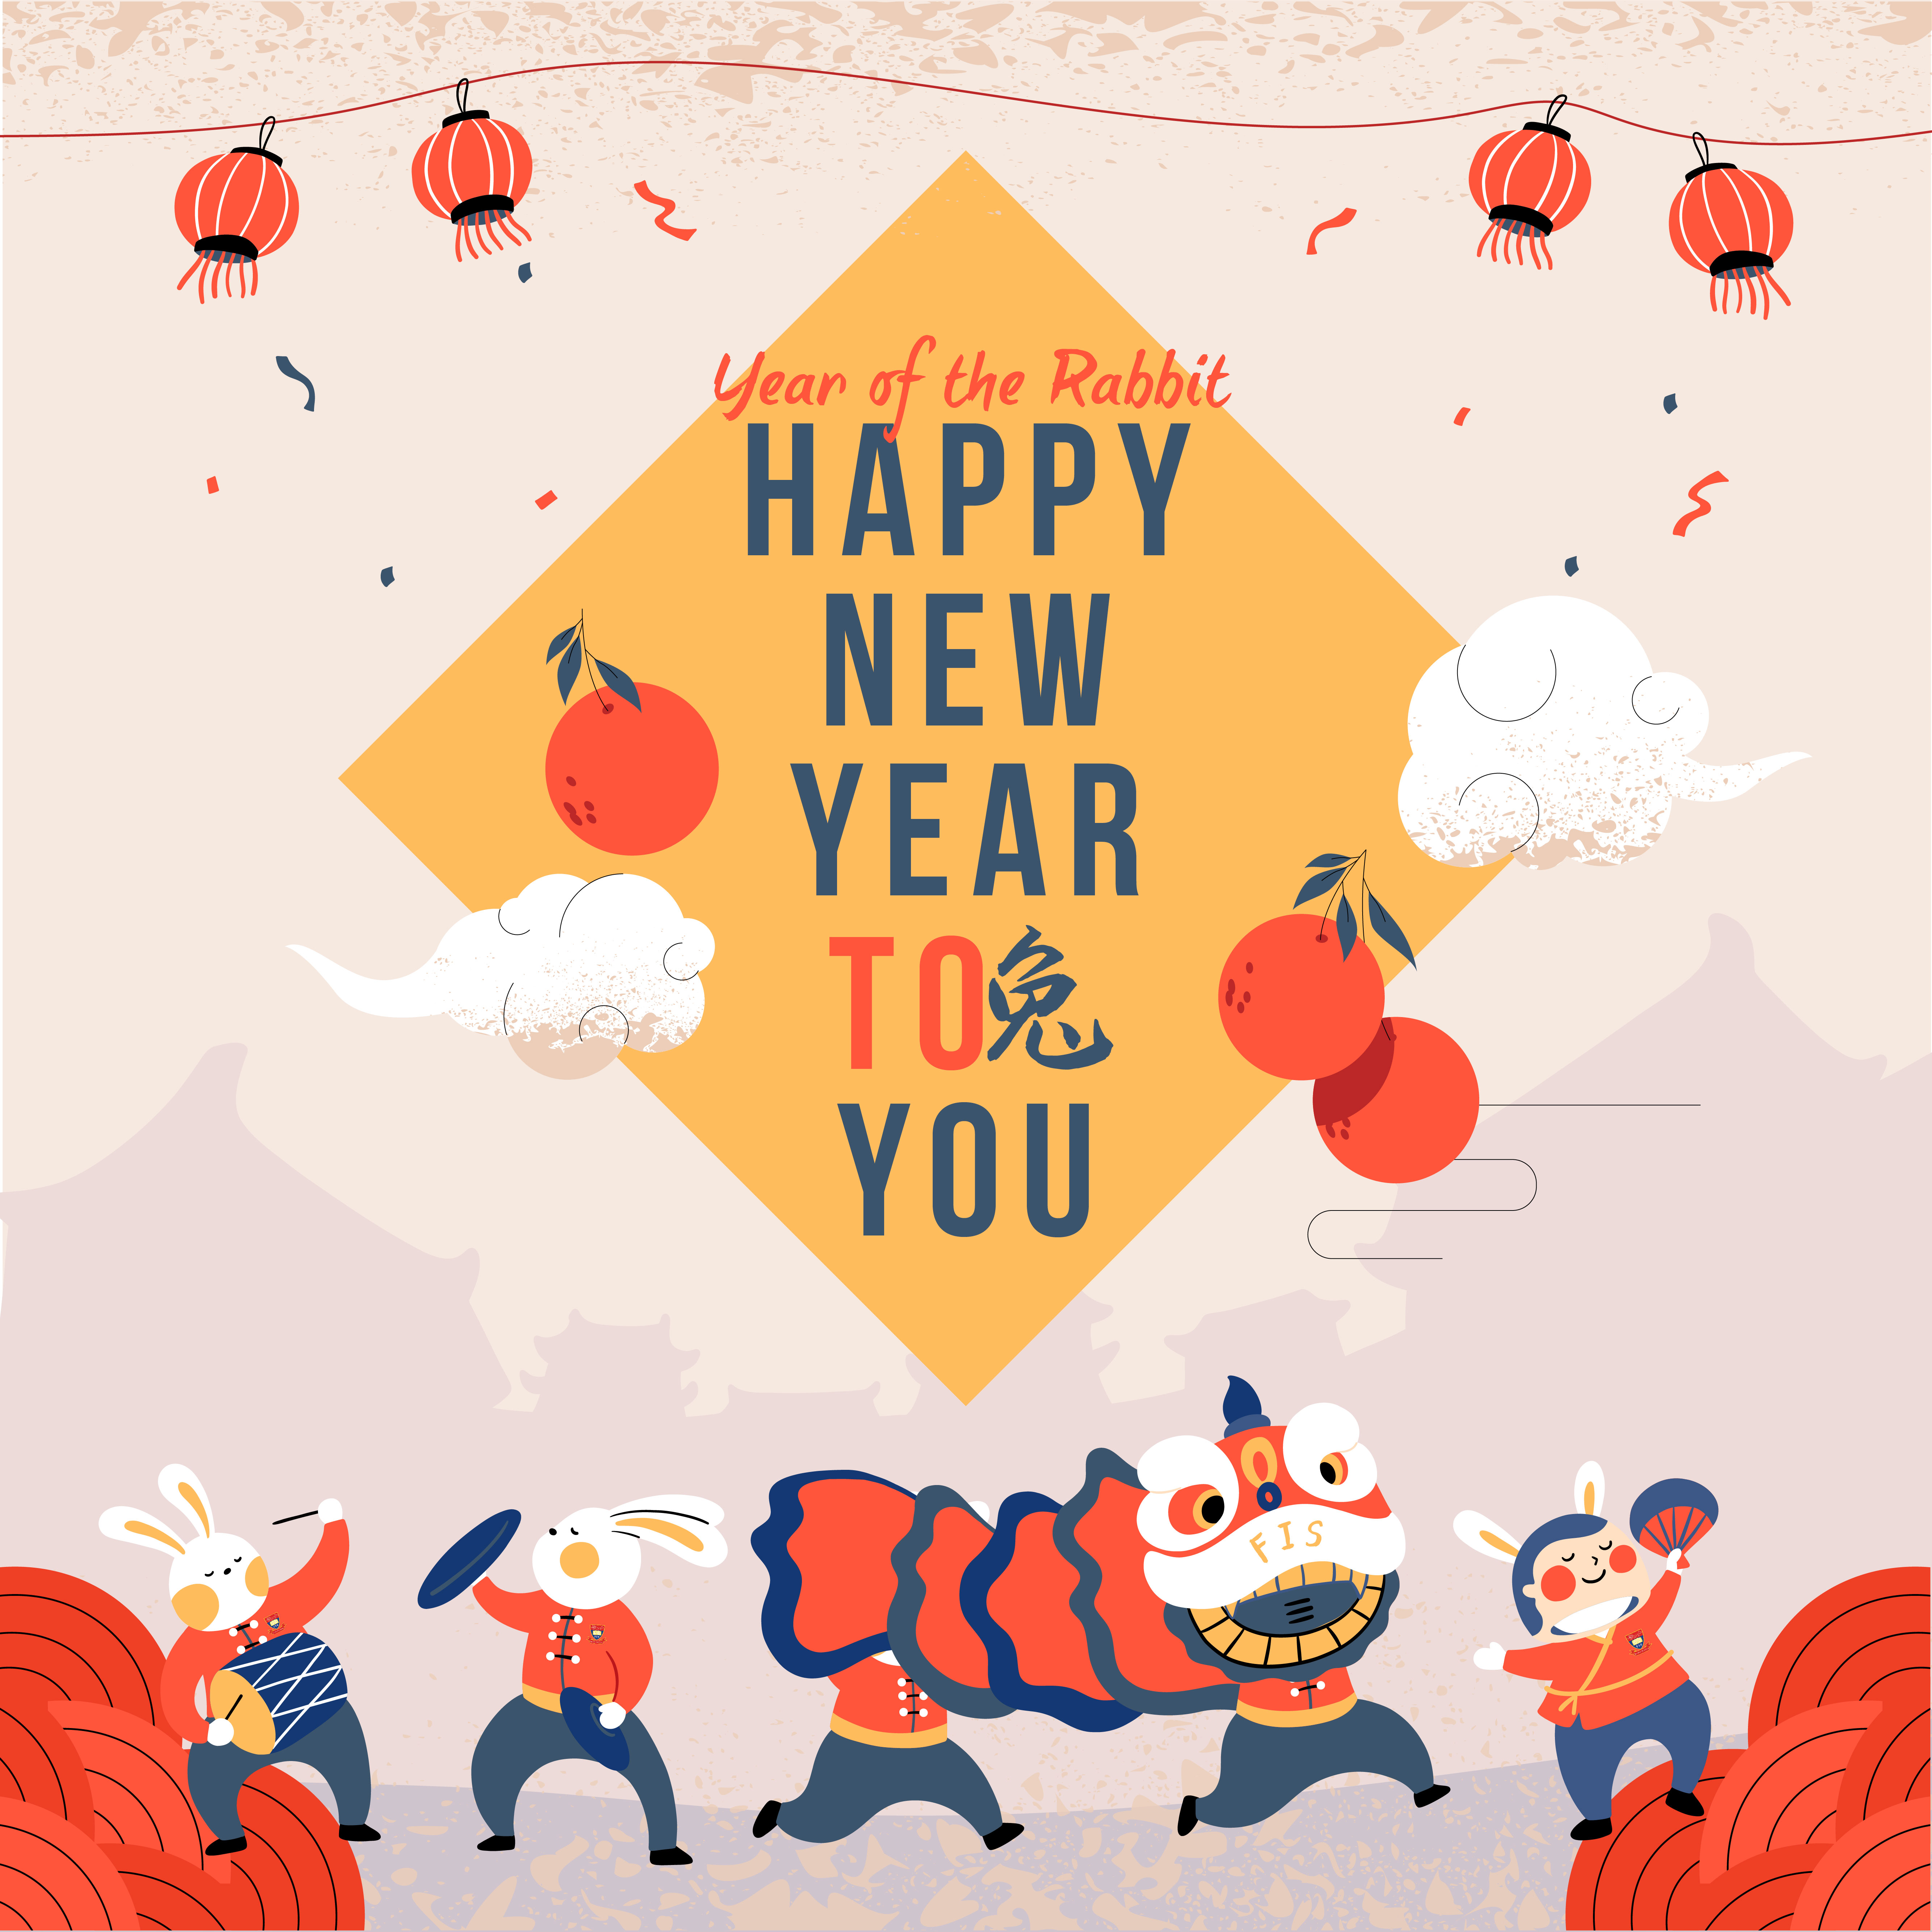 Have a happy and prosperous Chinese New Year! 🧨🧧🏮🧨🧧🏮